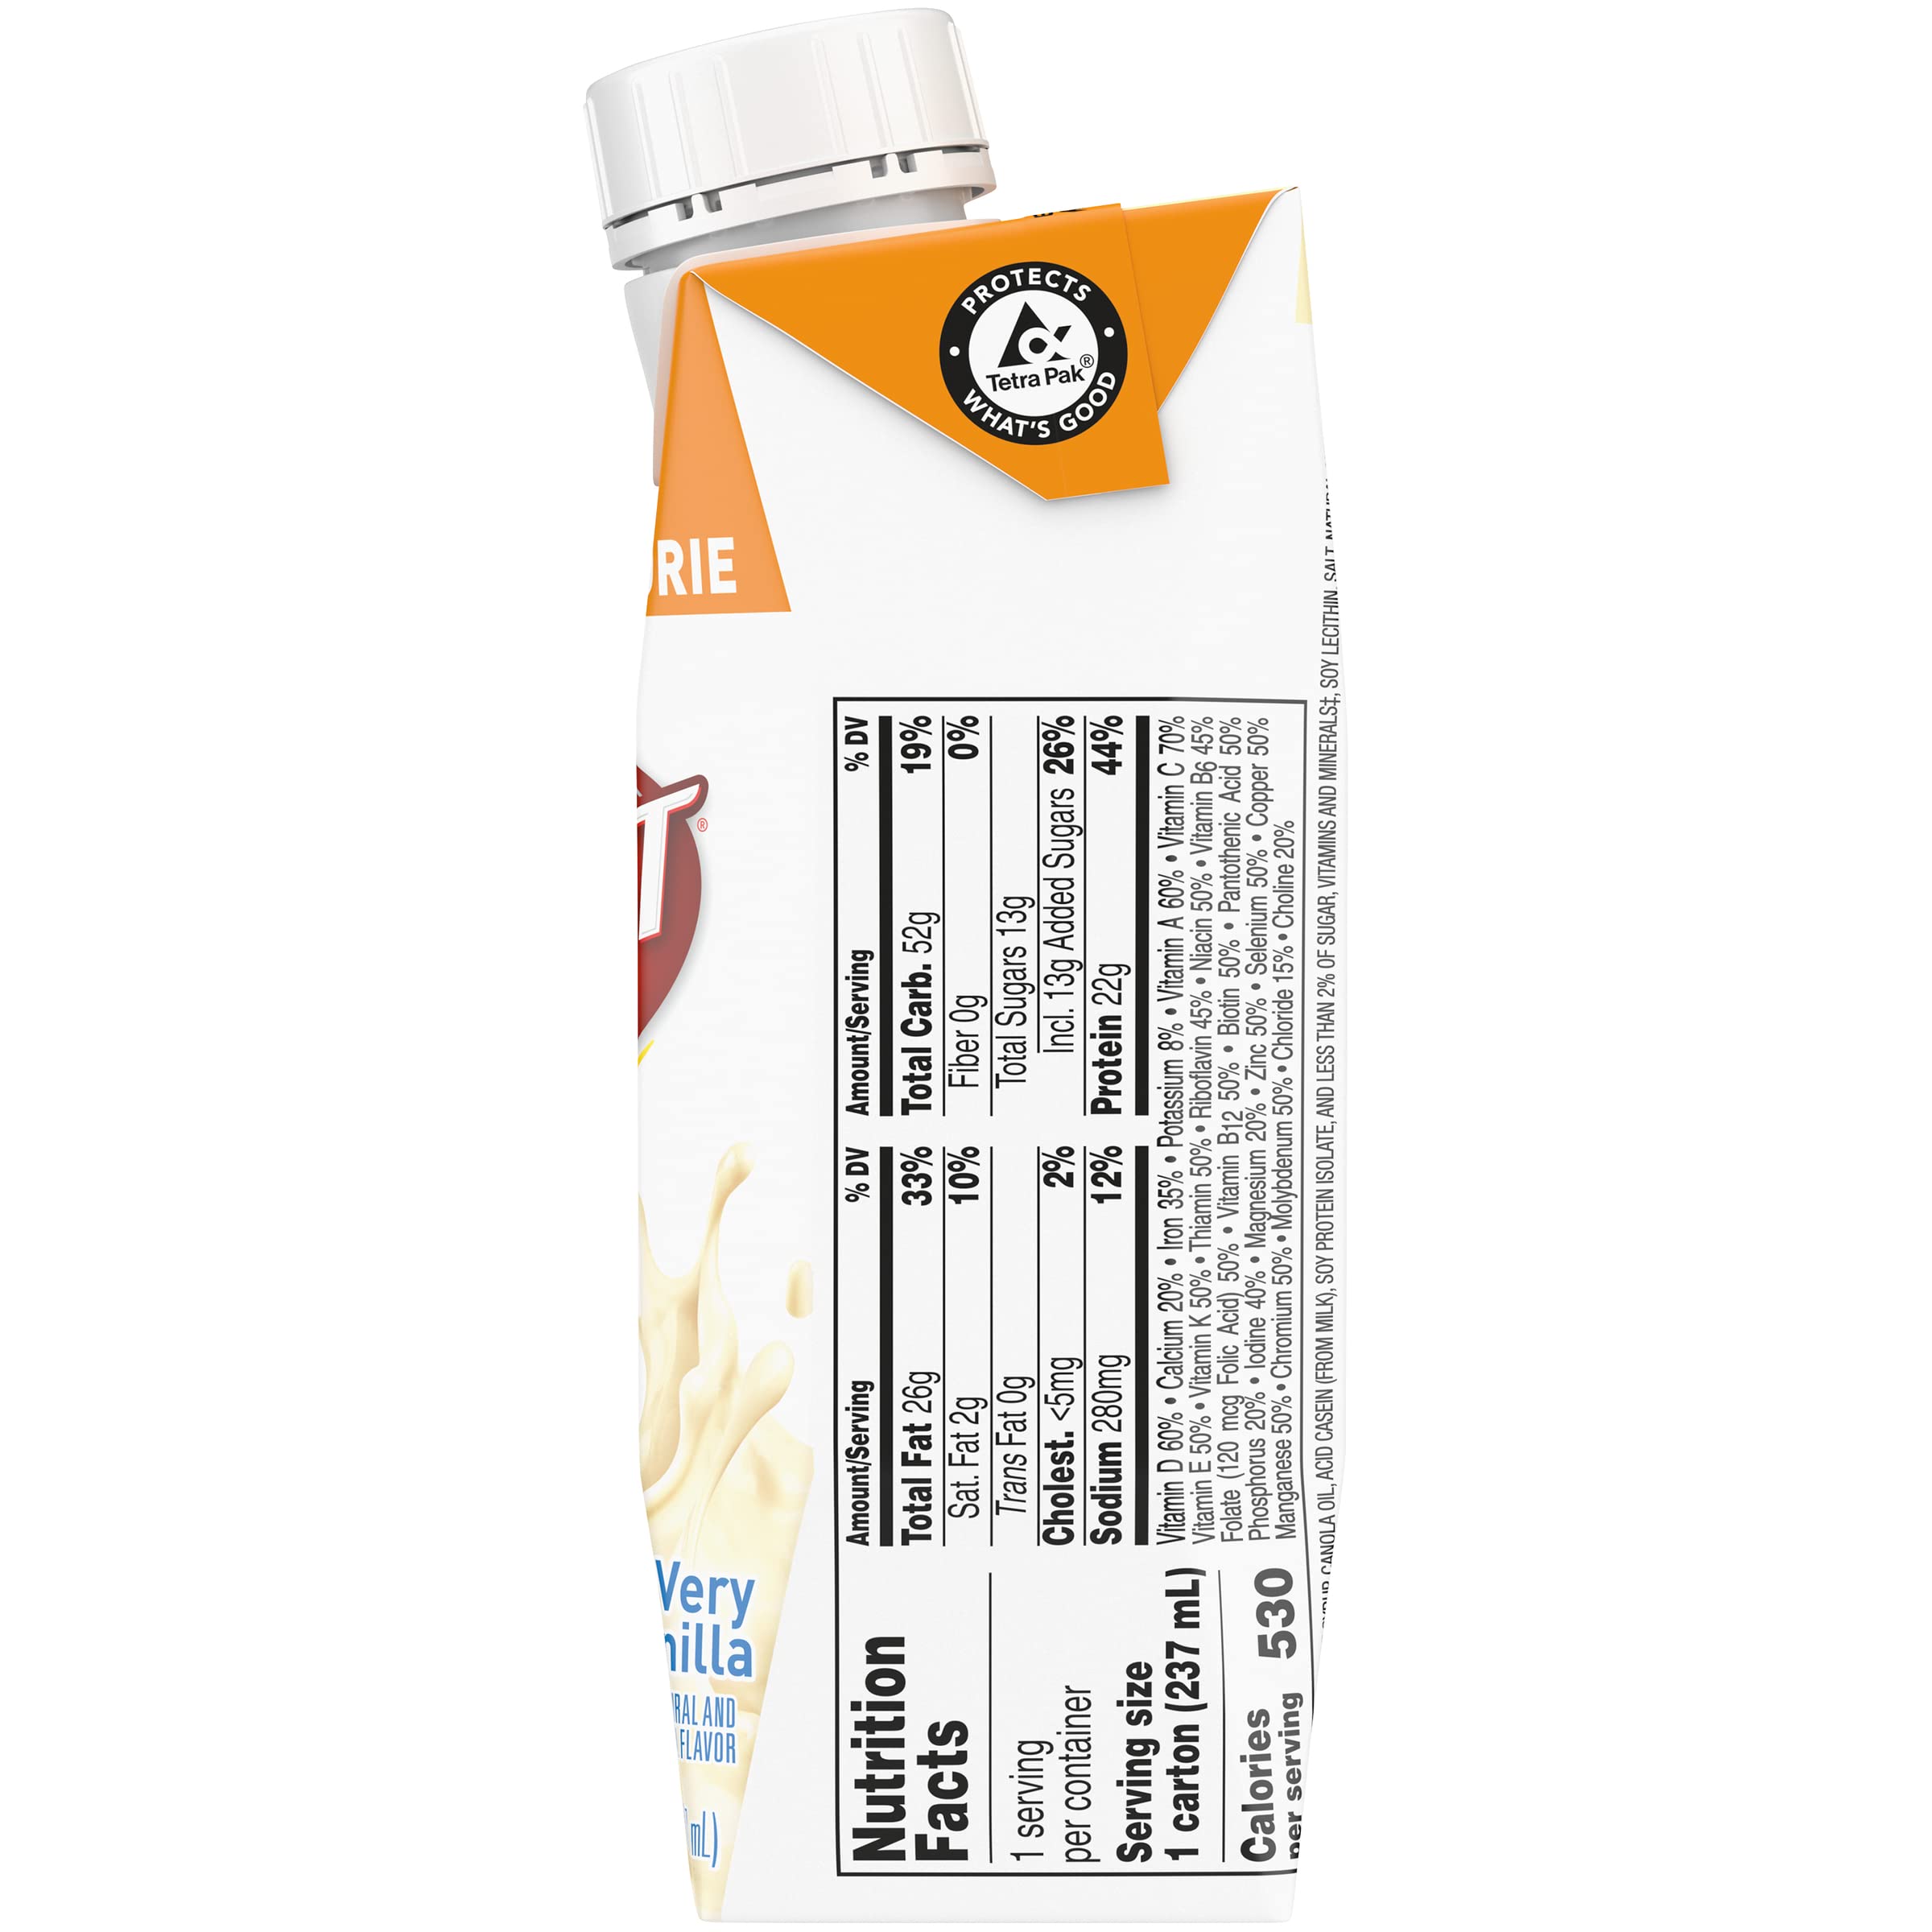 BOOST Very High Calorie Vanilla Nutritional Drink - 22g Protein, 530 Nutrient-Rich Calories, 8 FL OZ (Pack of 24)